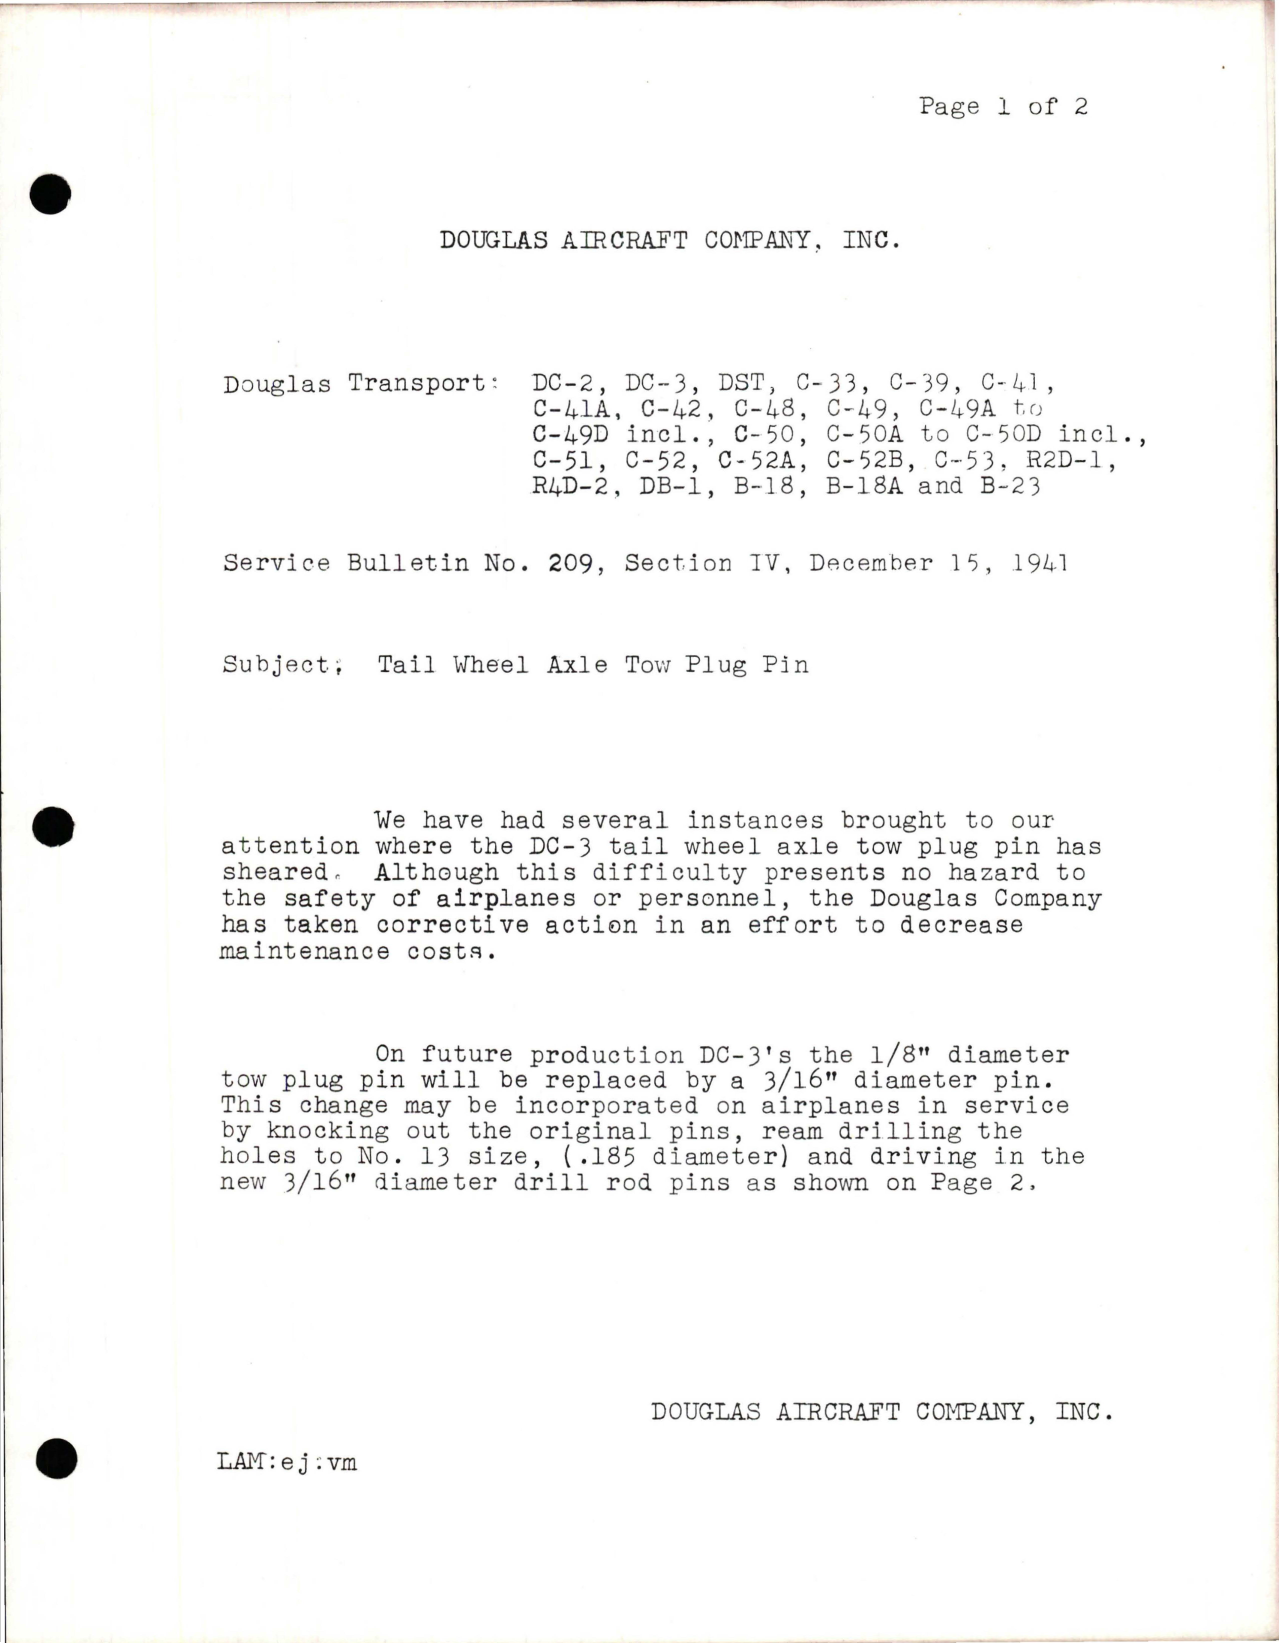 Sample page 1 from AirCorps Library document: Tail Wheel Axle Tow Plug Pin